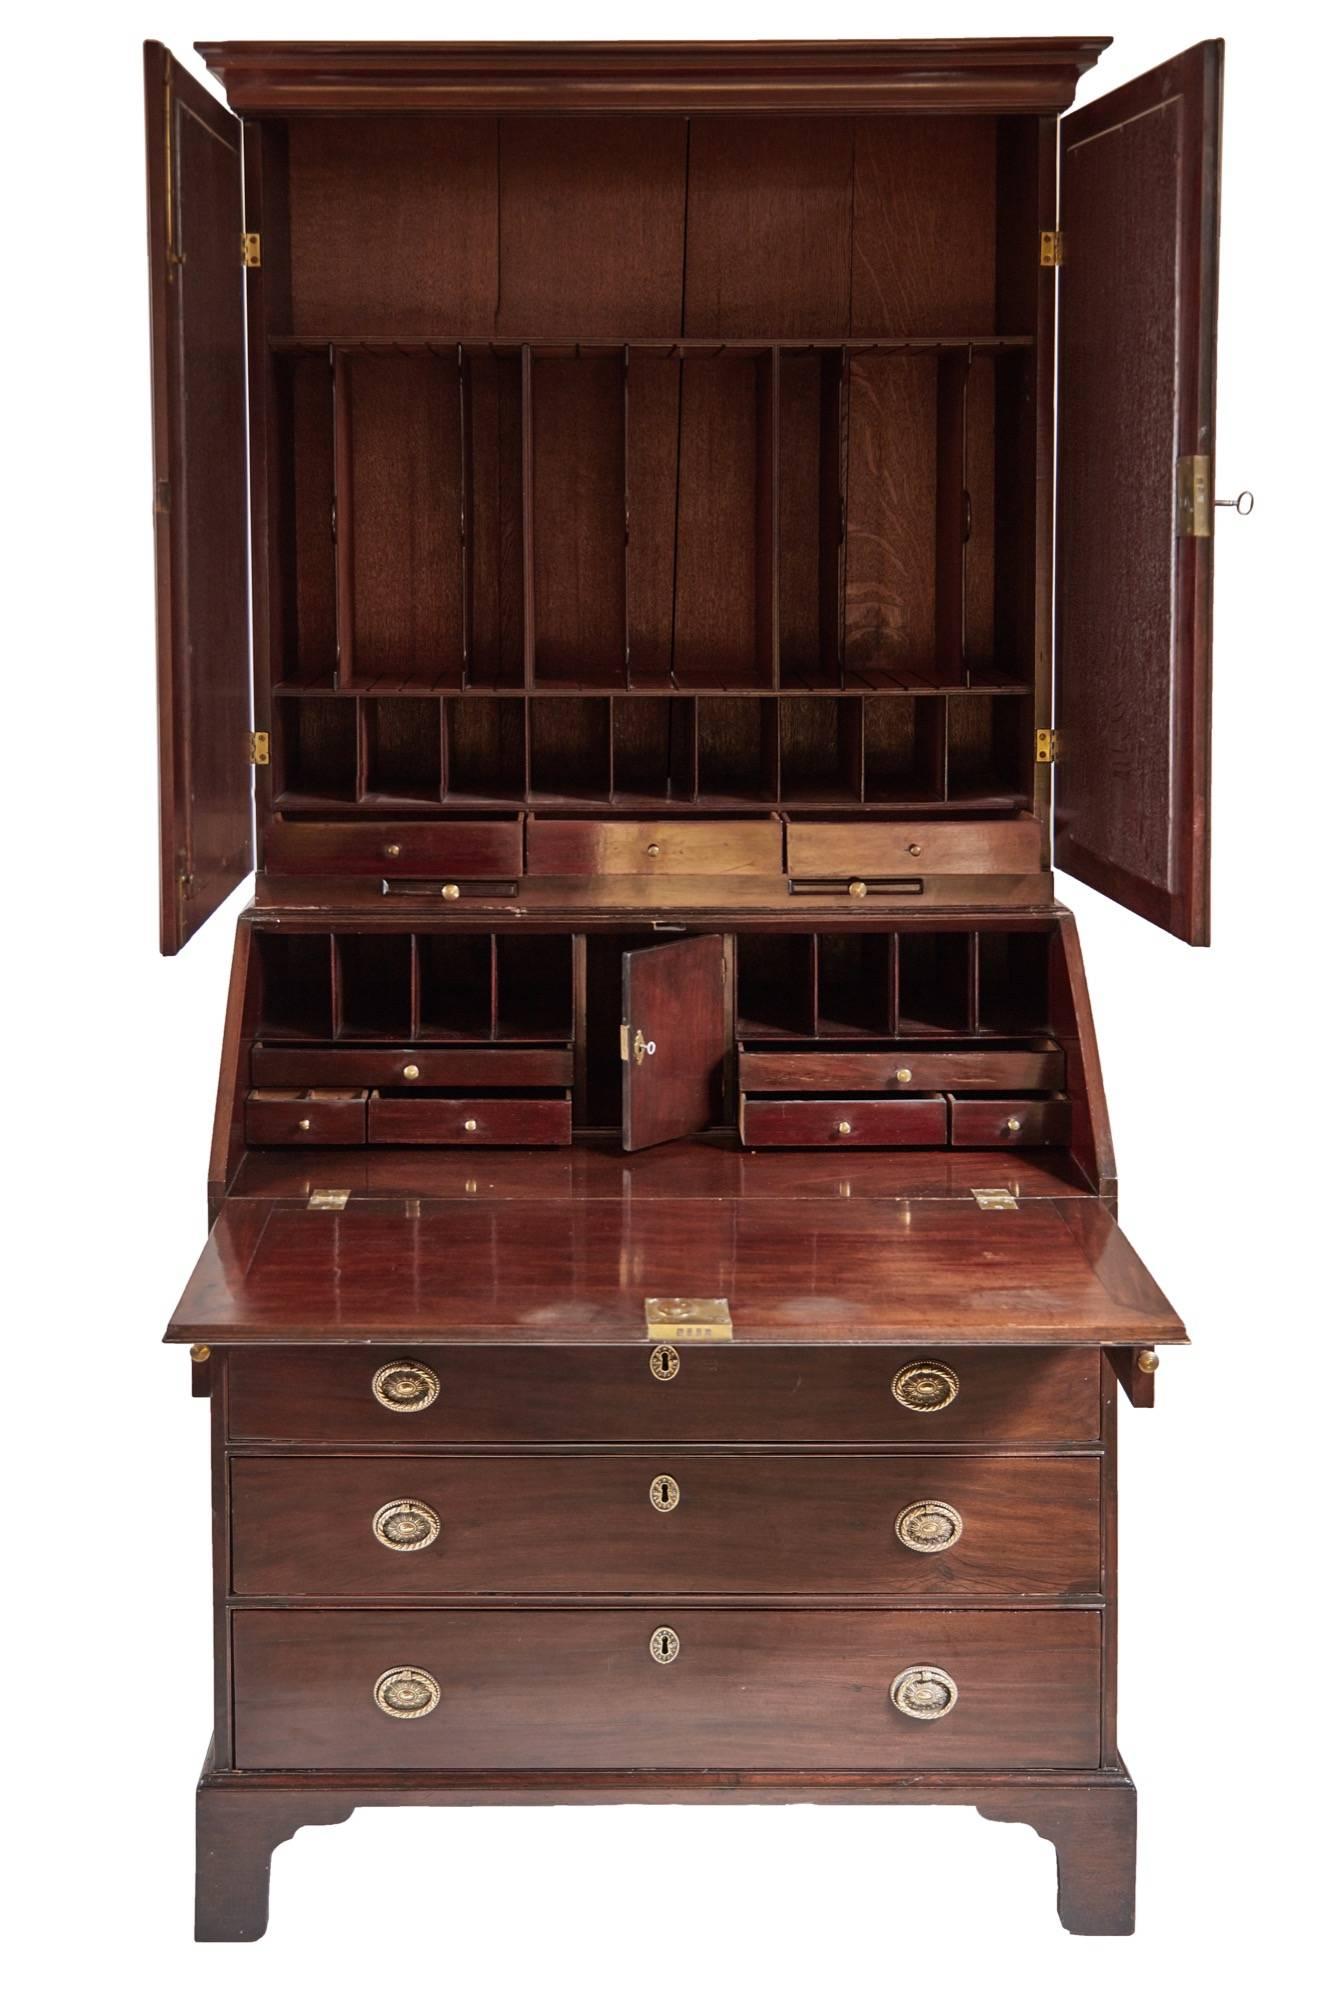 Georgian mahogany bureau bookcase, the top section has an ogee shaped cornice, the bookcase with original mirror plates enclosing a fitted interior with drawers and adjustable shelves, two candle slides under the mirrors, the bureau has original